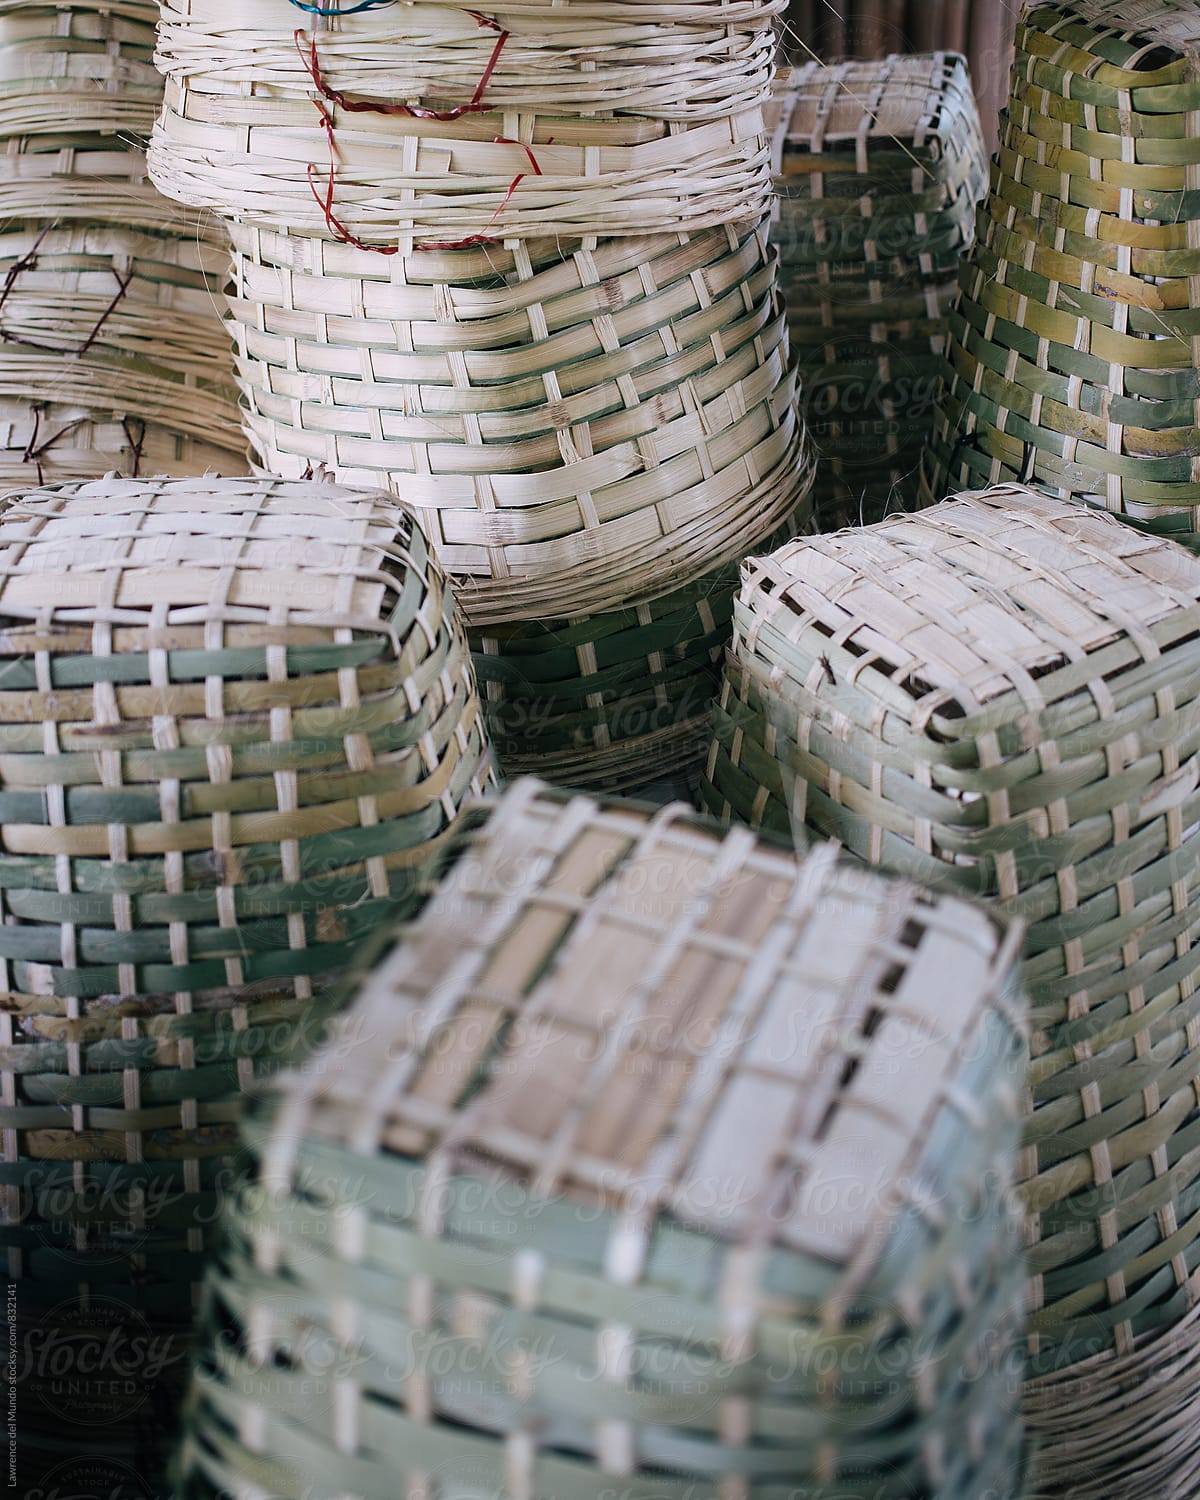 Stacks of empty baskets in a farm ready for the fruit harvest